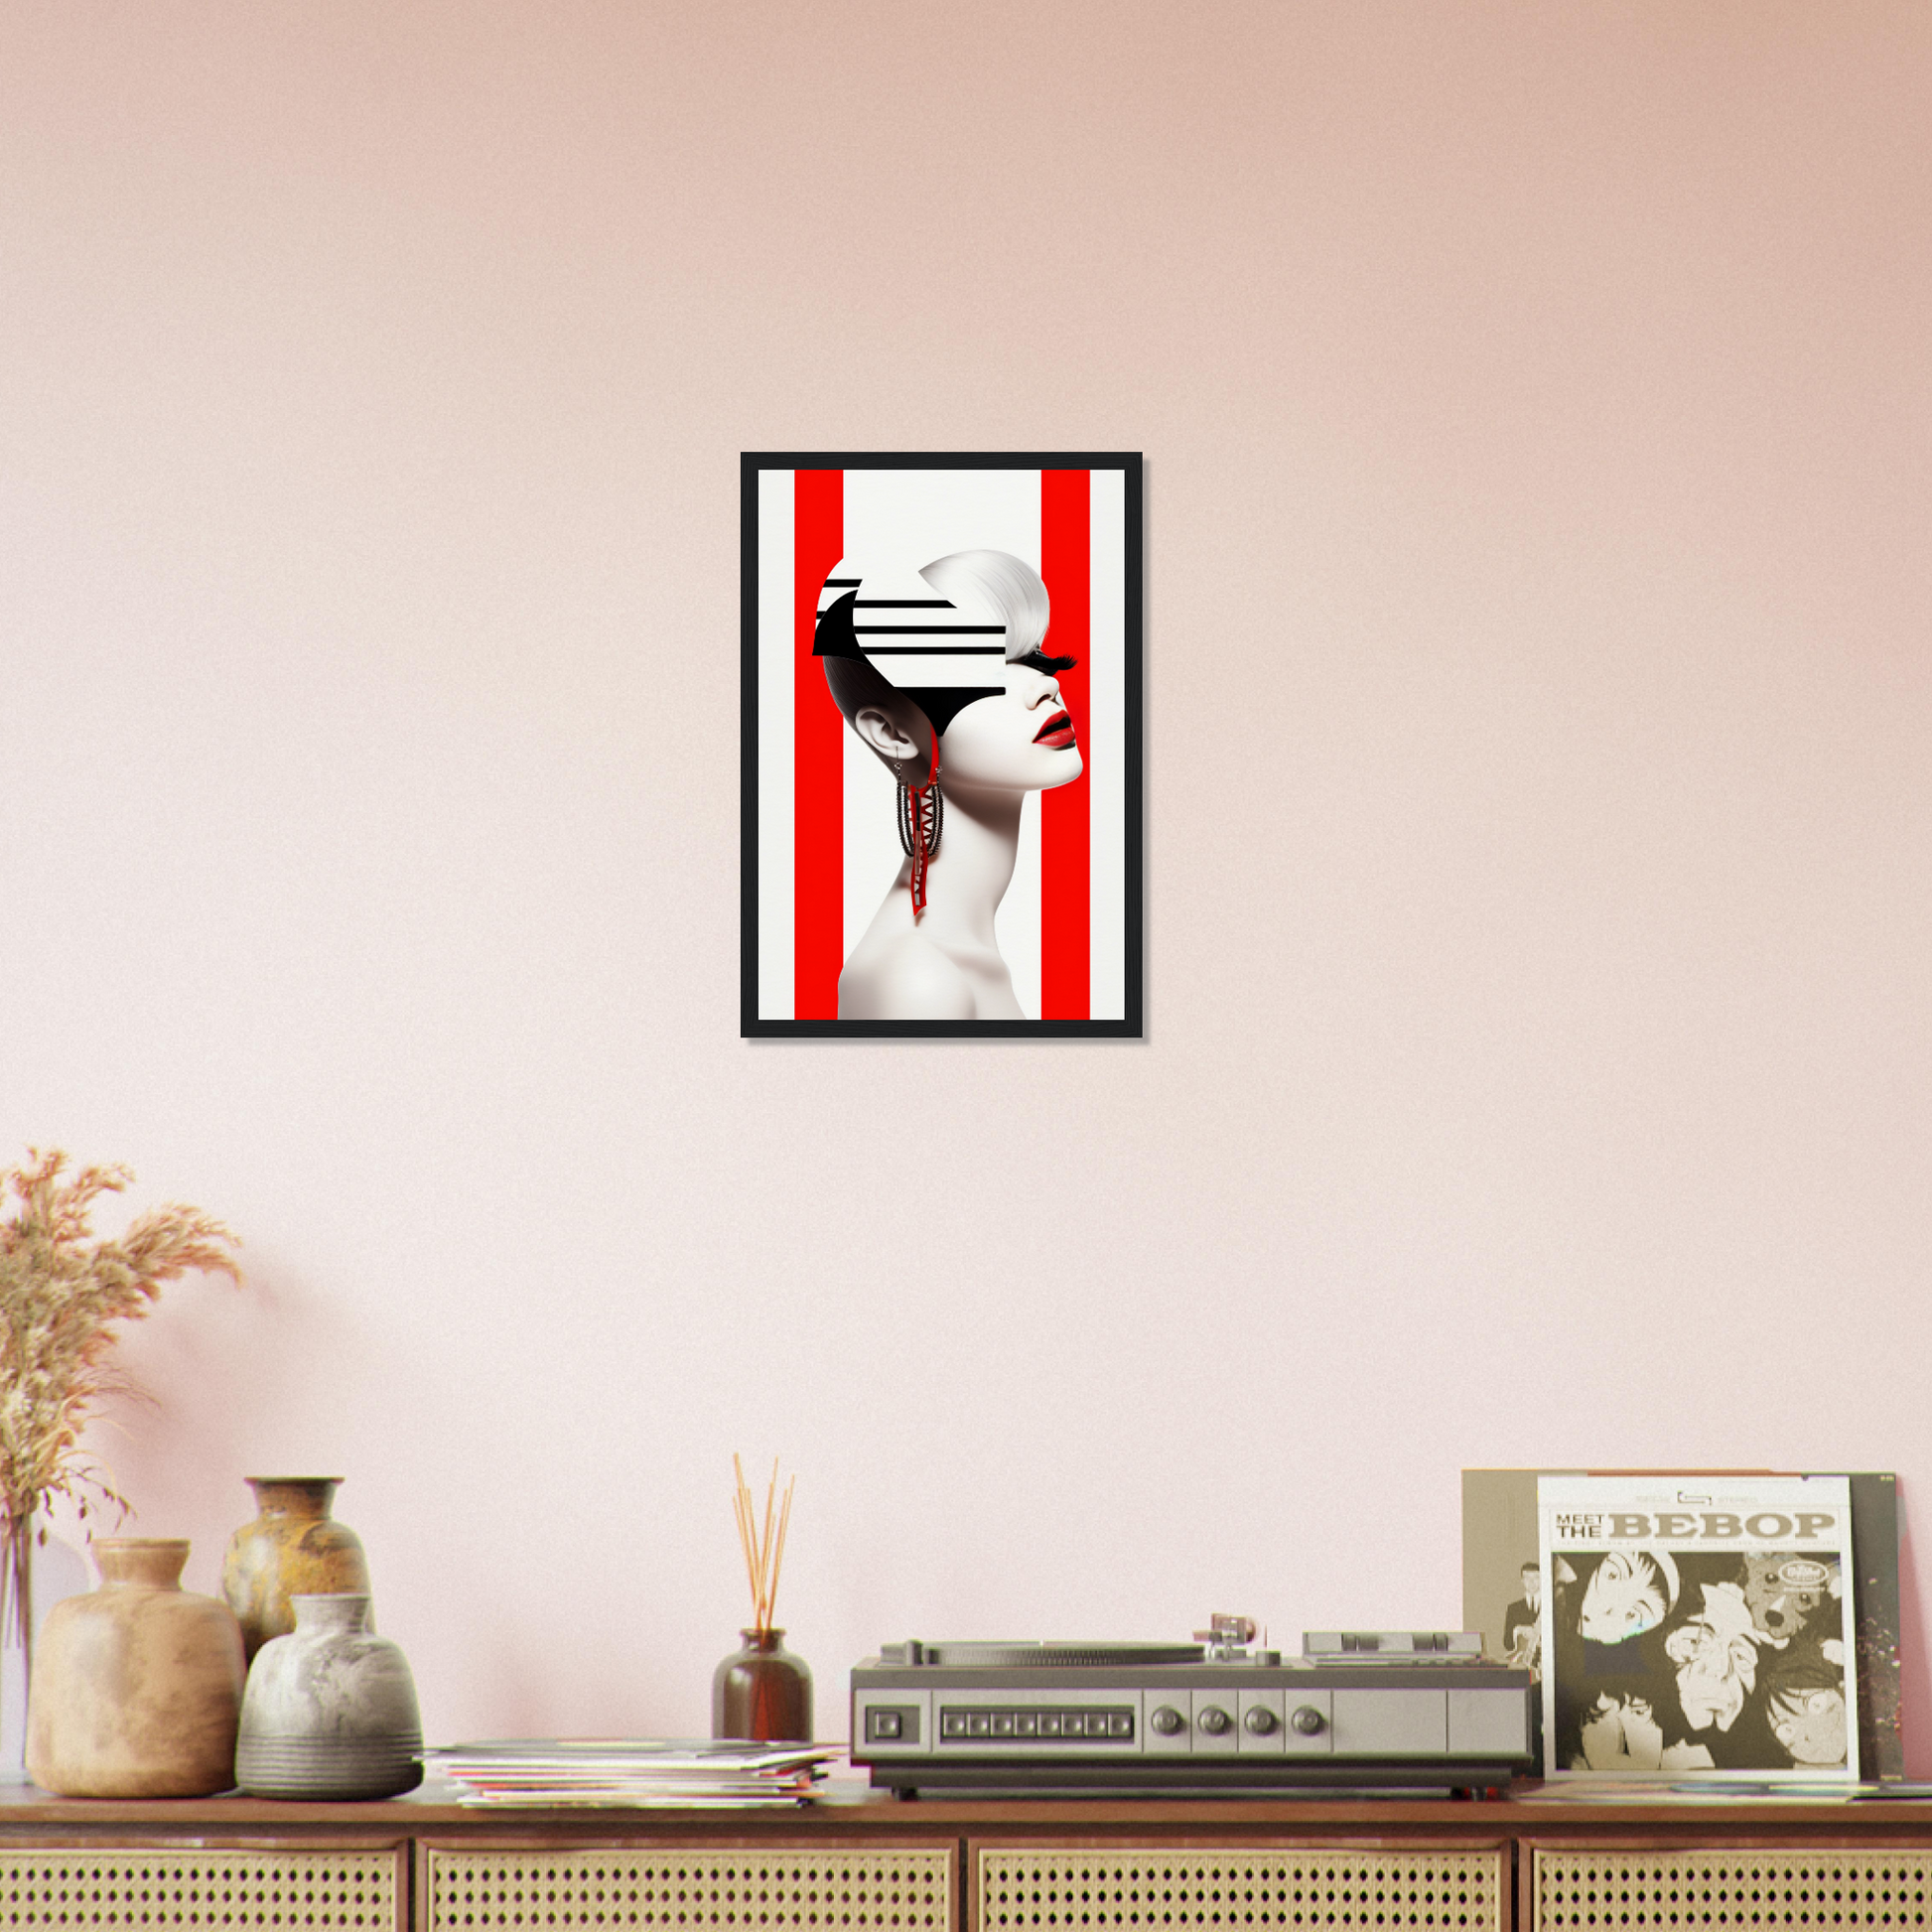 A high-quality Deep Dive The Oracle Windows™ Collection for my wall featuring a portrait of a woman with red and white stripes on her face. This artwork will transform your space.